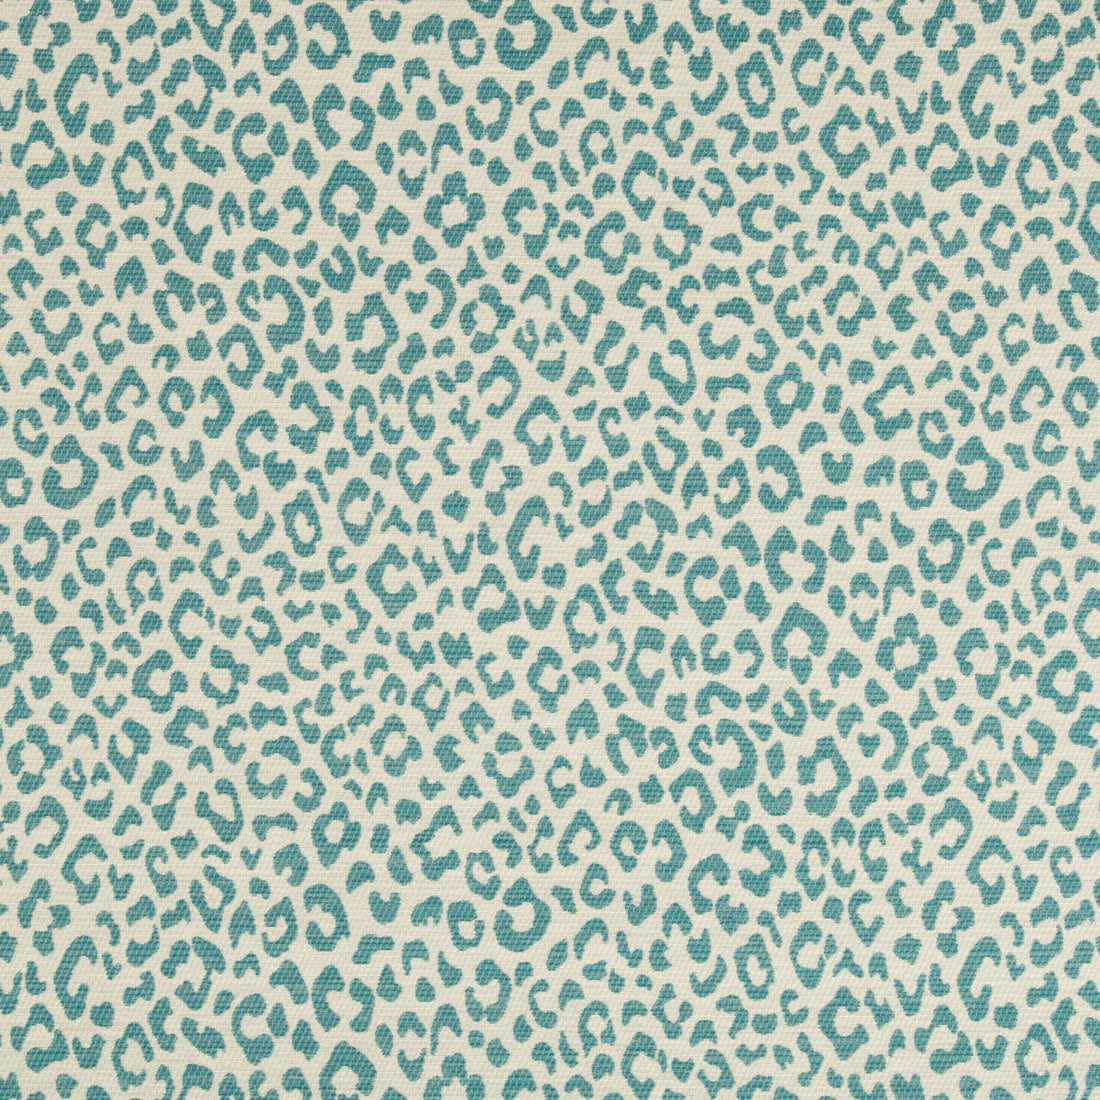 Kravet Design fabric in 34686-35 color - pattern 34686.35.0 - by Kravet Design in the Performance Crypton Home collection